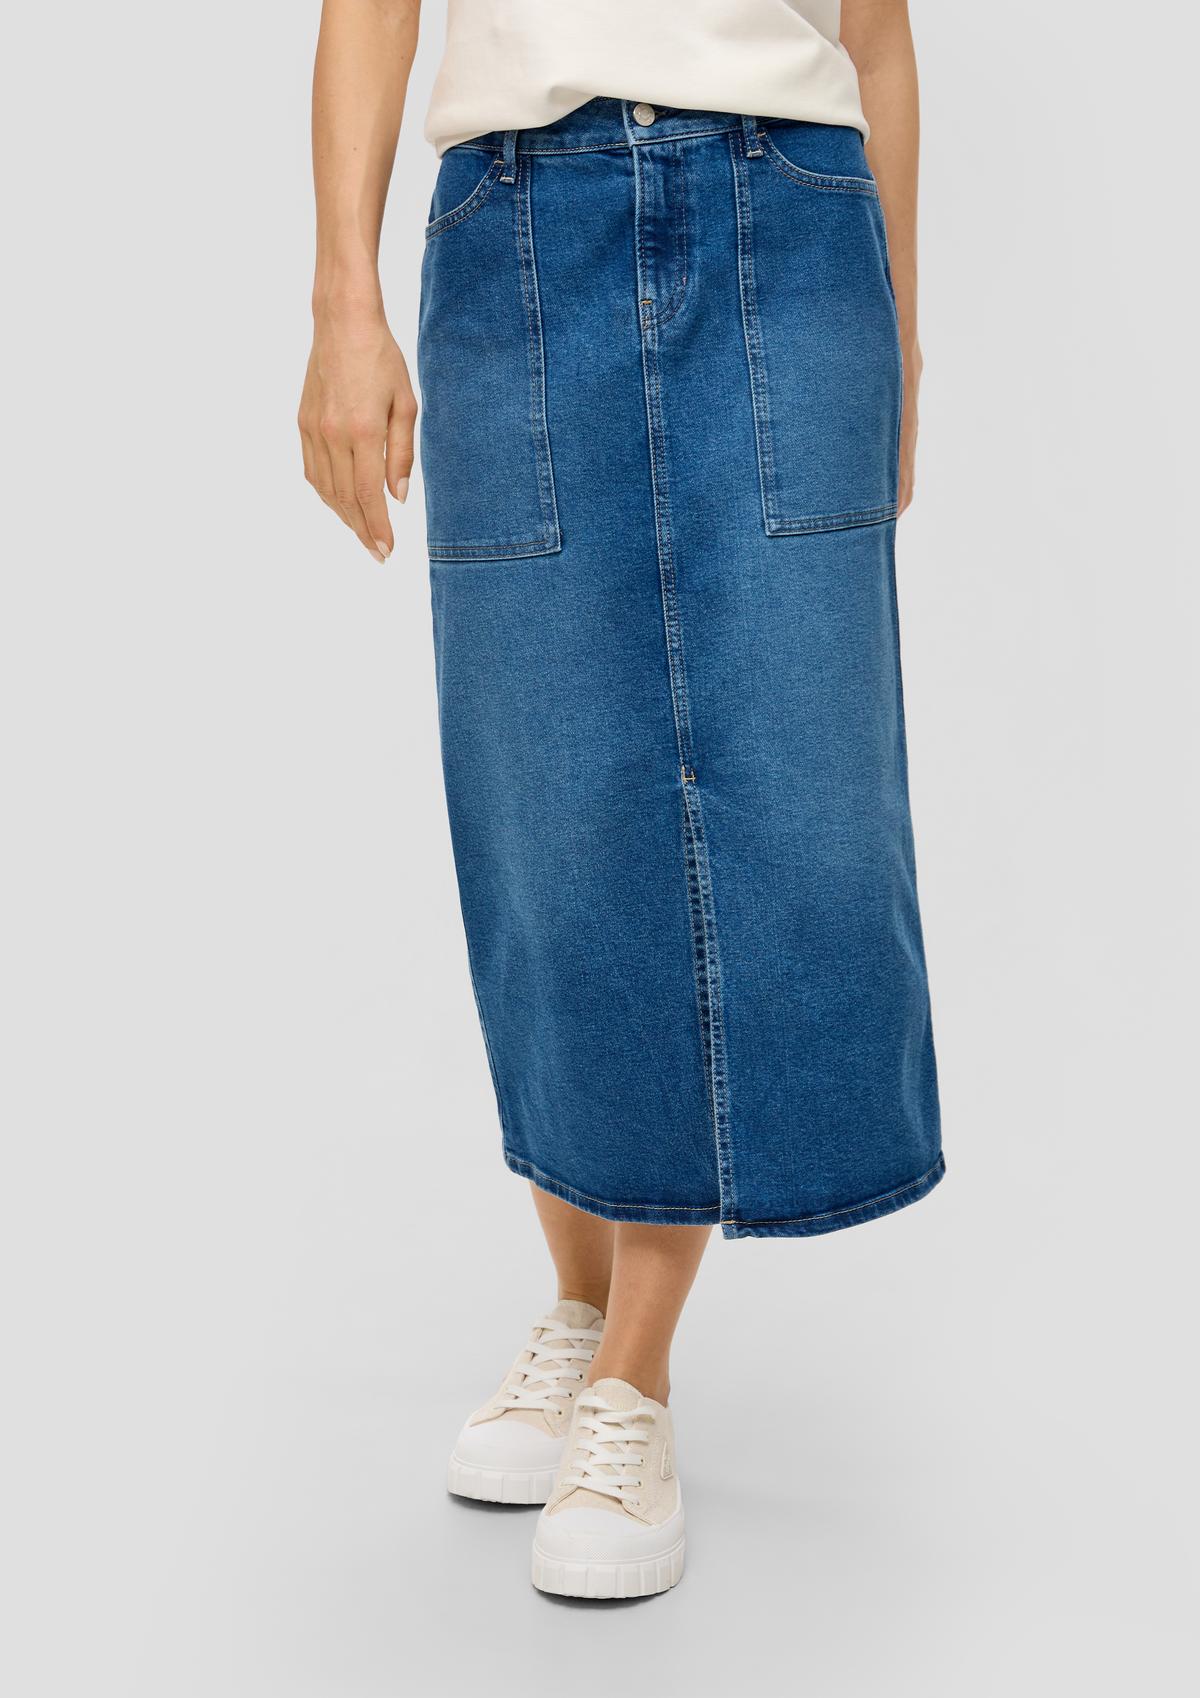 s.Oliver Denim skirt with a kick pleat